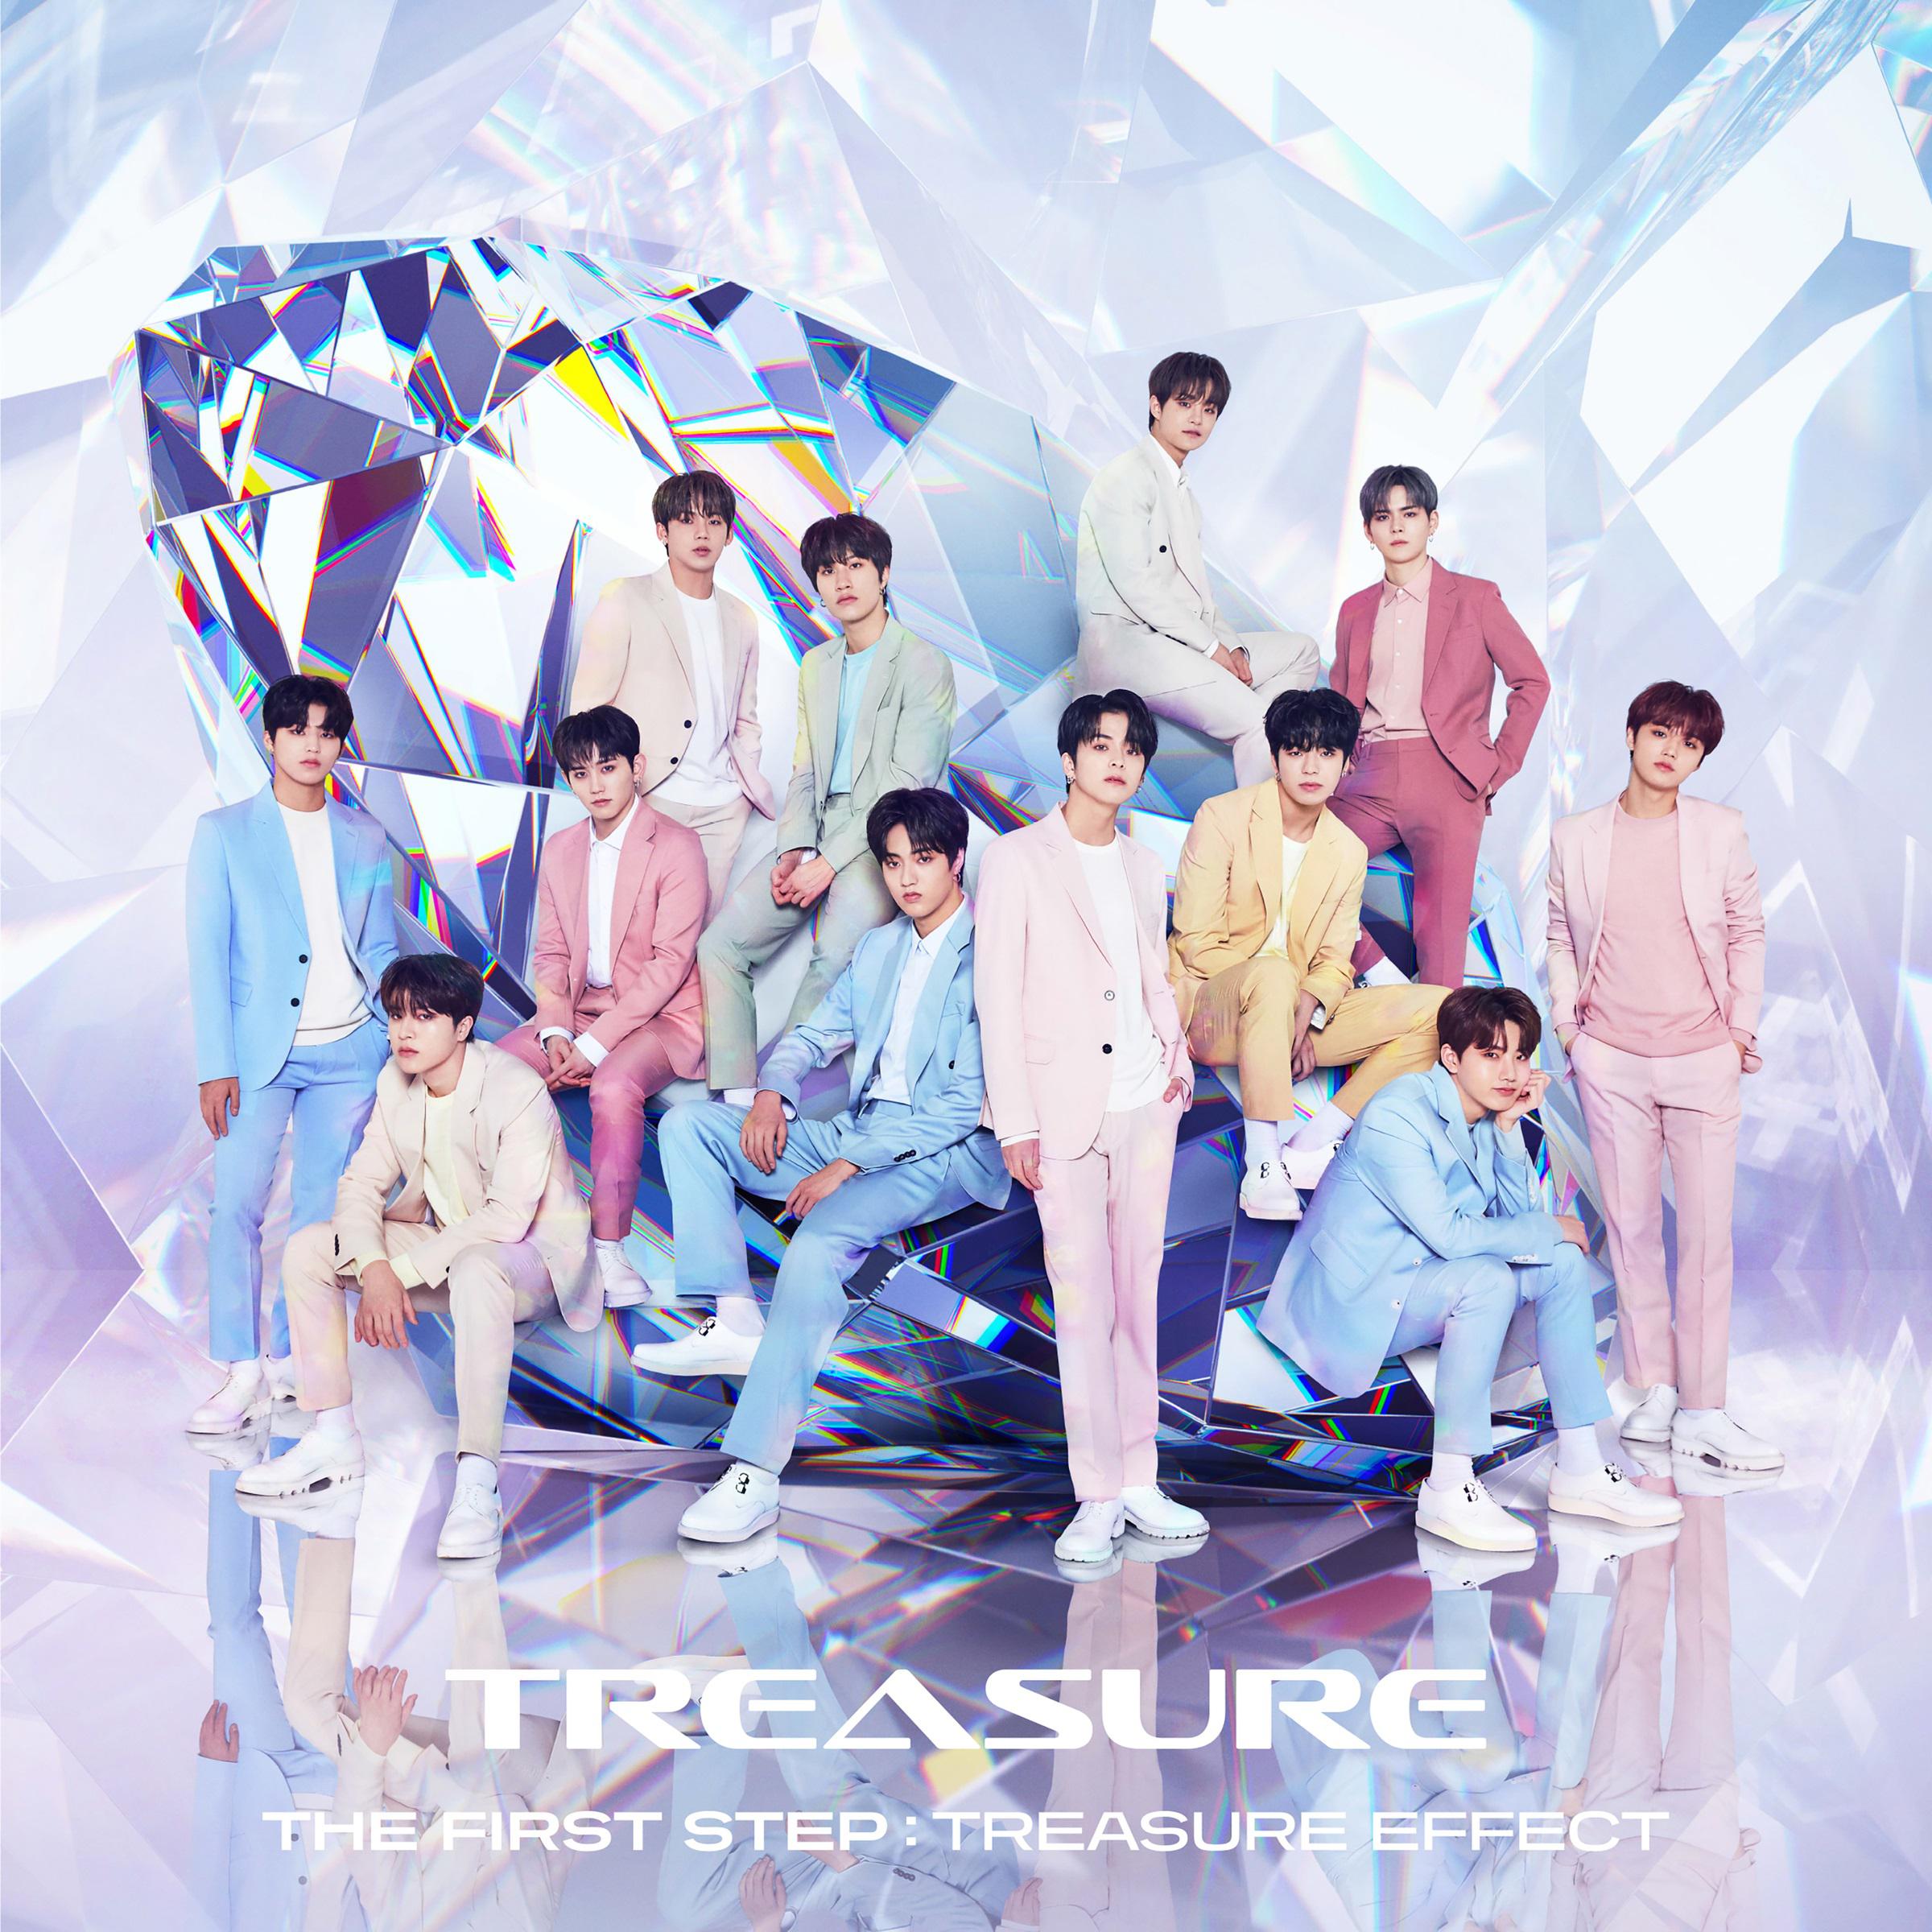 COME TO ME歌词 歌手TREASURE-专辑THE FIRST STEP : TREASURE EFFECT-单曲《COME TO ME》LRC歌词下载